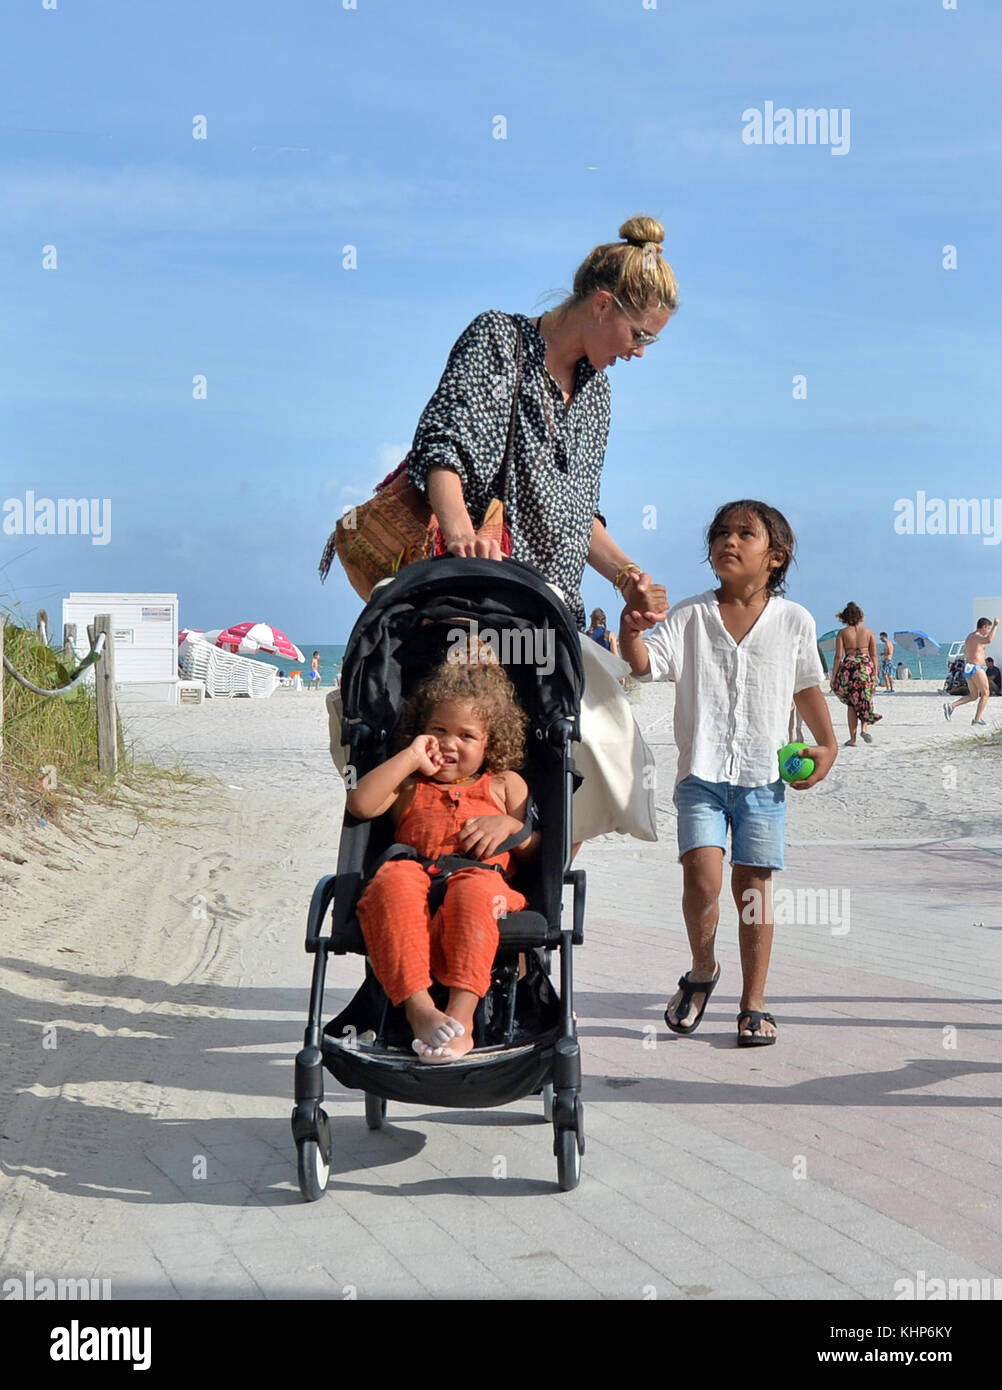 MIAMI, FL - JANUARY 03: Doutzen Kroes the former Victoria's Secret Angel  wearing a skimpy black triangle string bikini was joined by her adorable  children, son Phyllon, five, and daughter Myllena, two